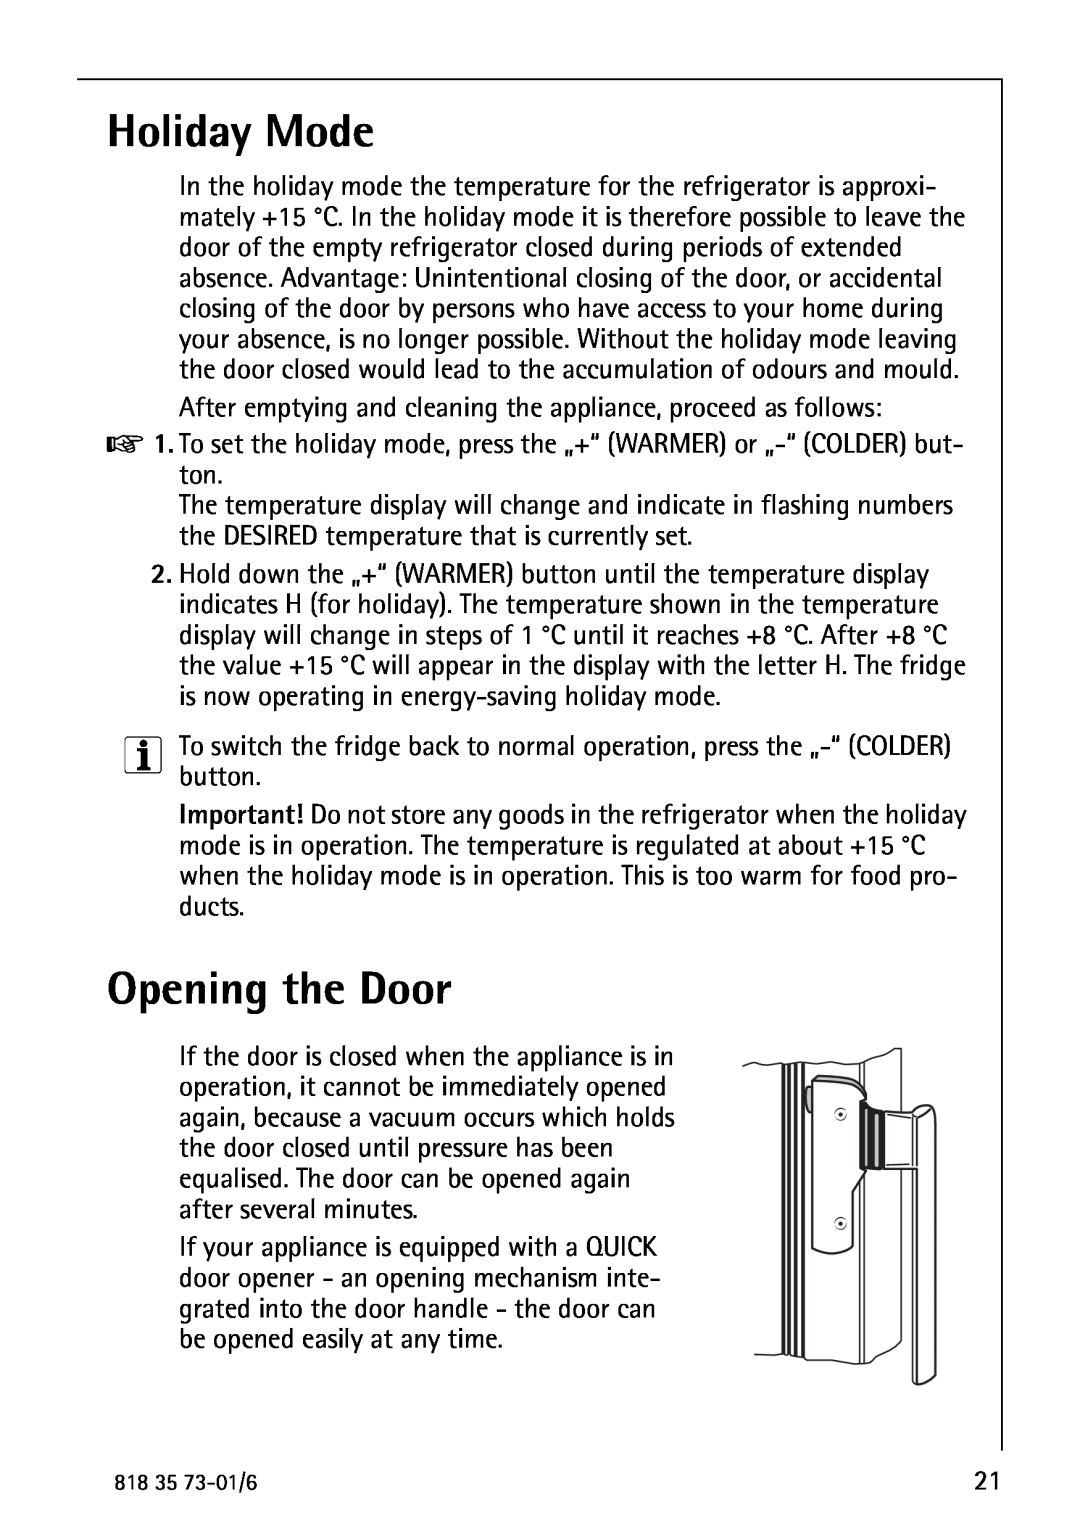 Electrolux SANTO 72340 KA operating instructions Holiday Mode, Opening the Door 